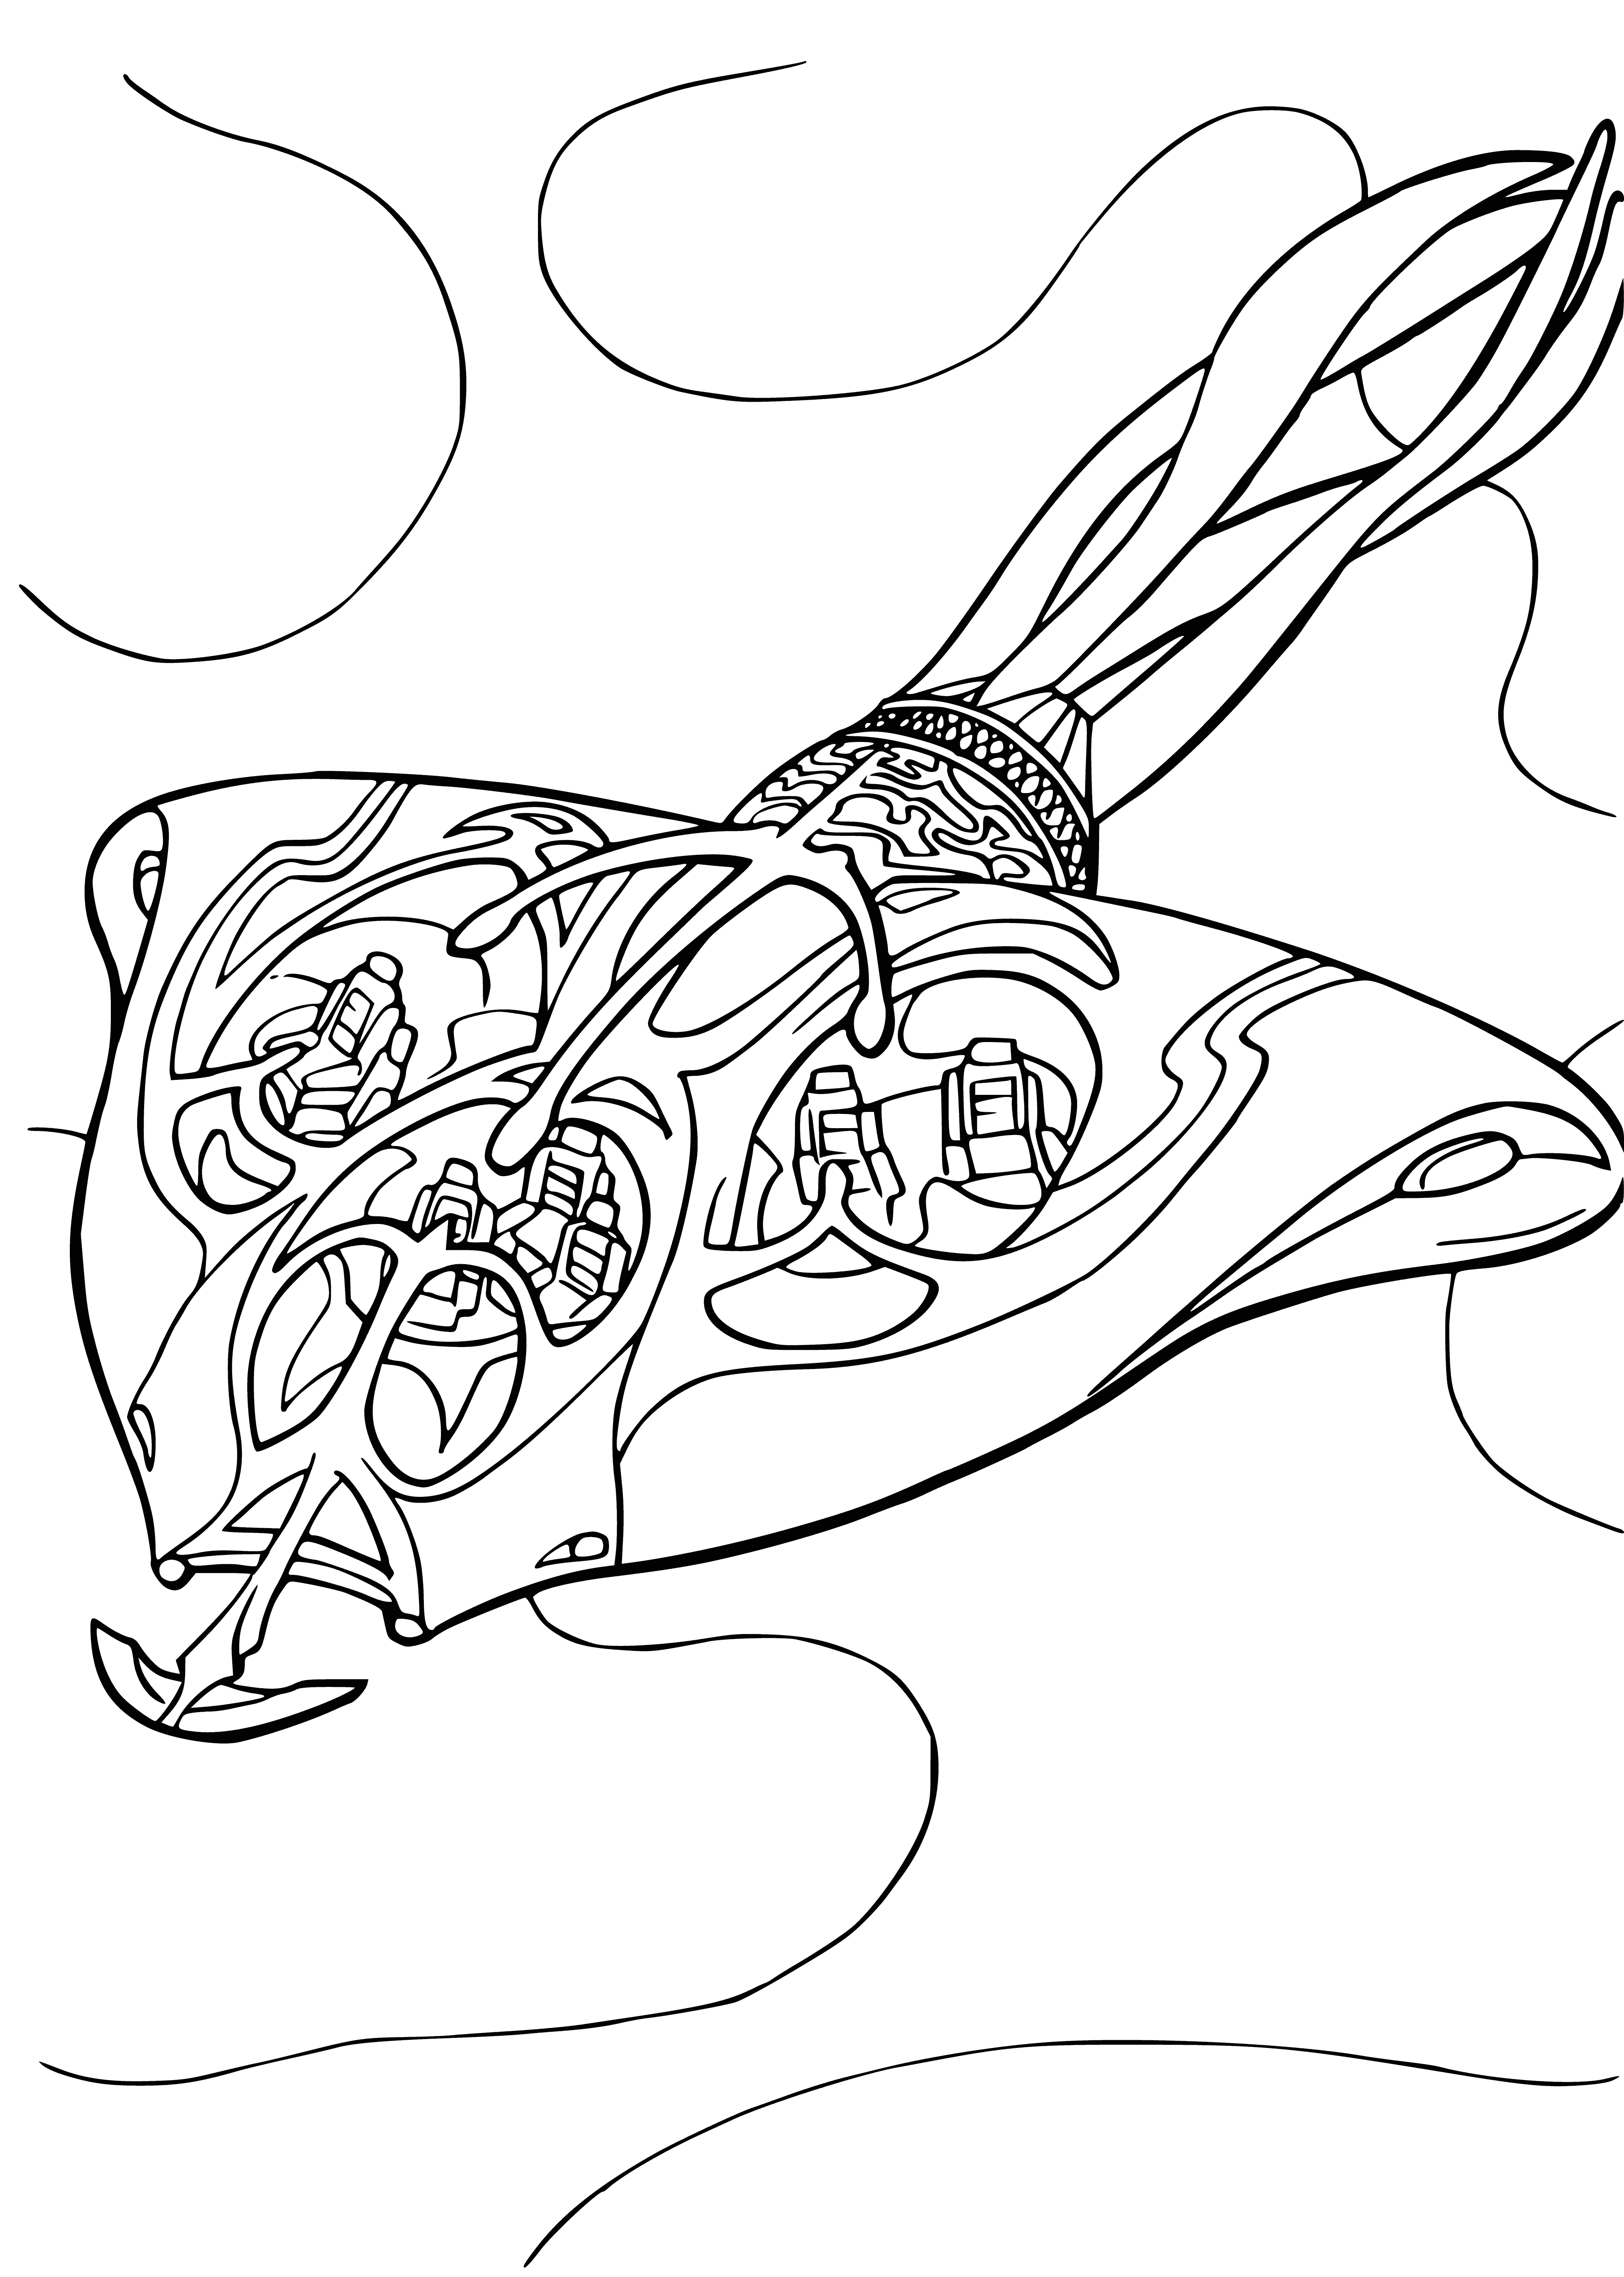 coloring page: Small ship sails through an underwater cave, billowing sails & glowing blue light ahead.